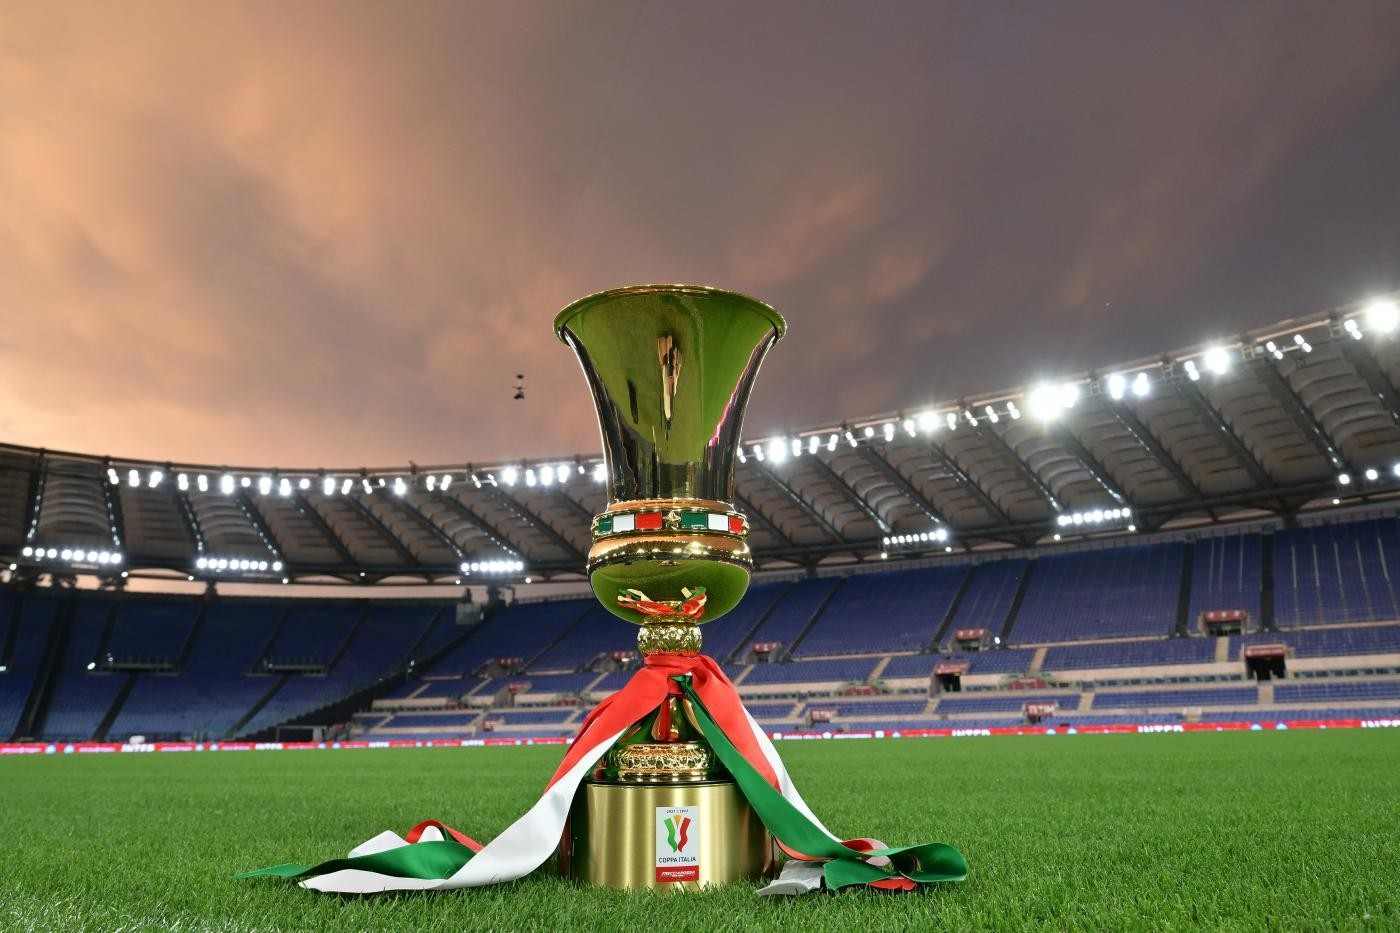 You are currently viewing COPPA ITALIA: LAZIO,AS ROMA, ATALANTA AND AC MILAN LIVE MATCH PREVIEW